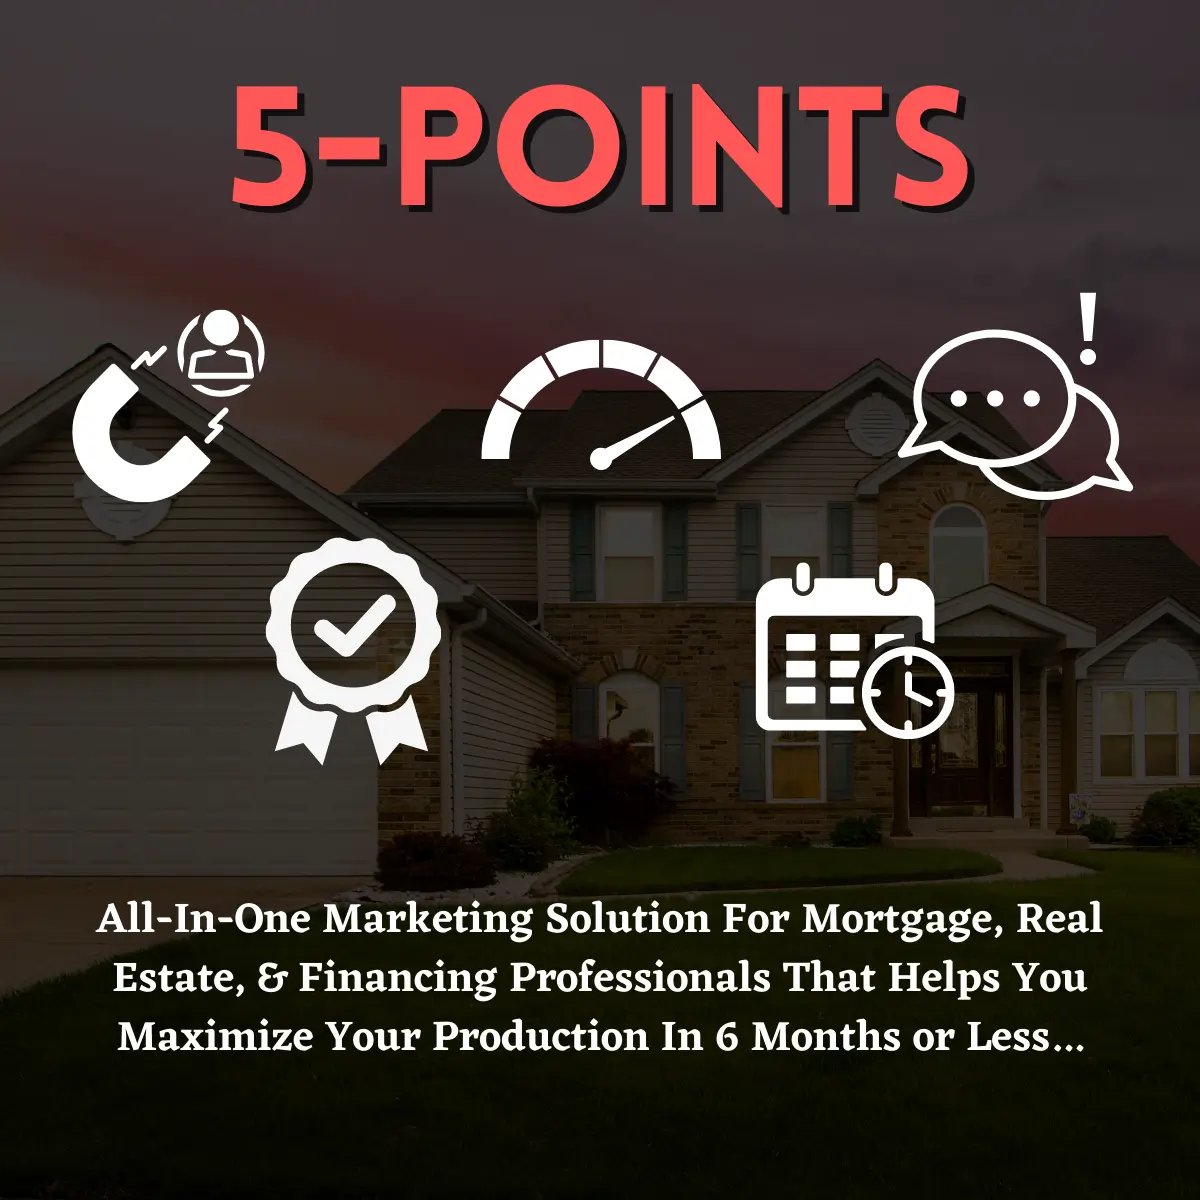 5-POINTS marketing solution for mortgage, real estate, and finance professionals looking for quality lead generation, digital marketing services, appointment setting, building a full sales pipeline, and more